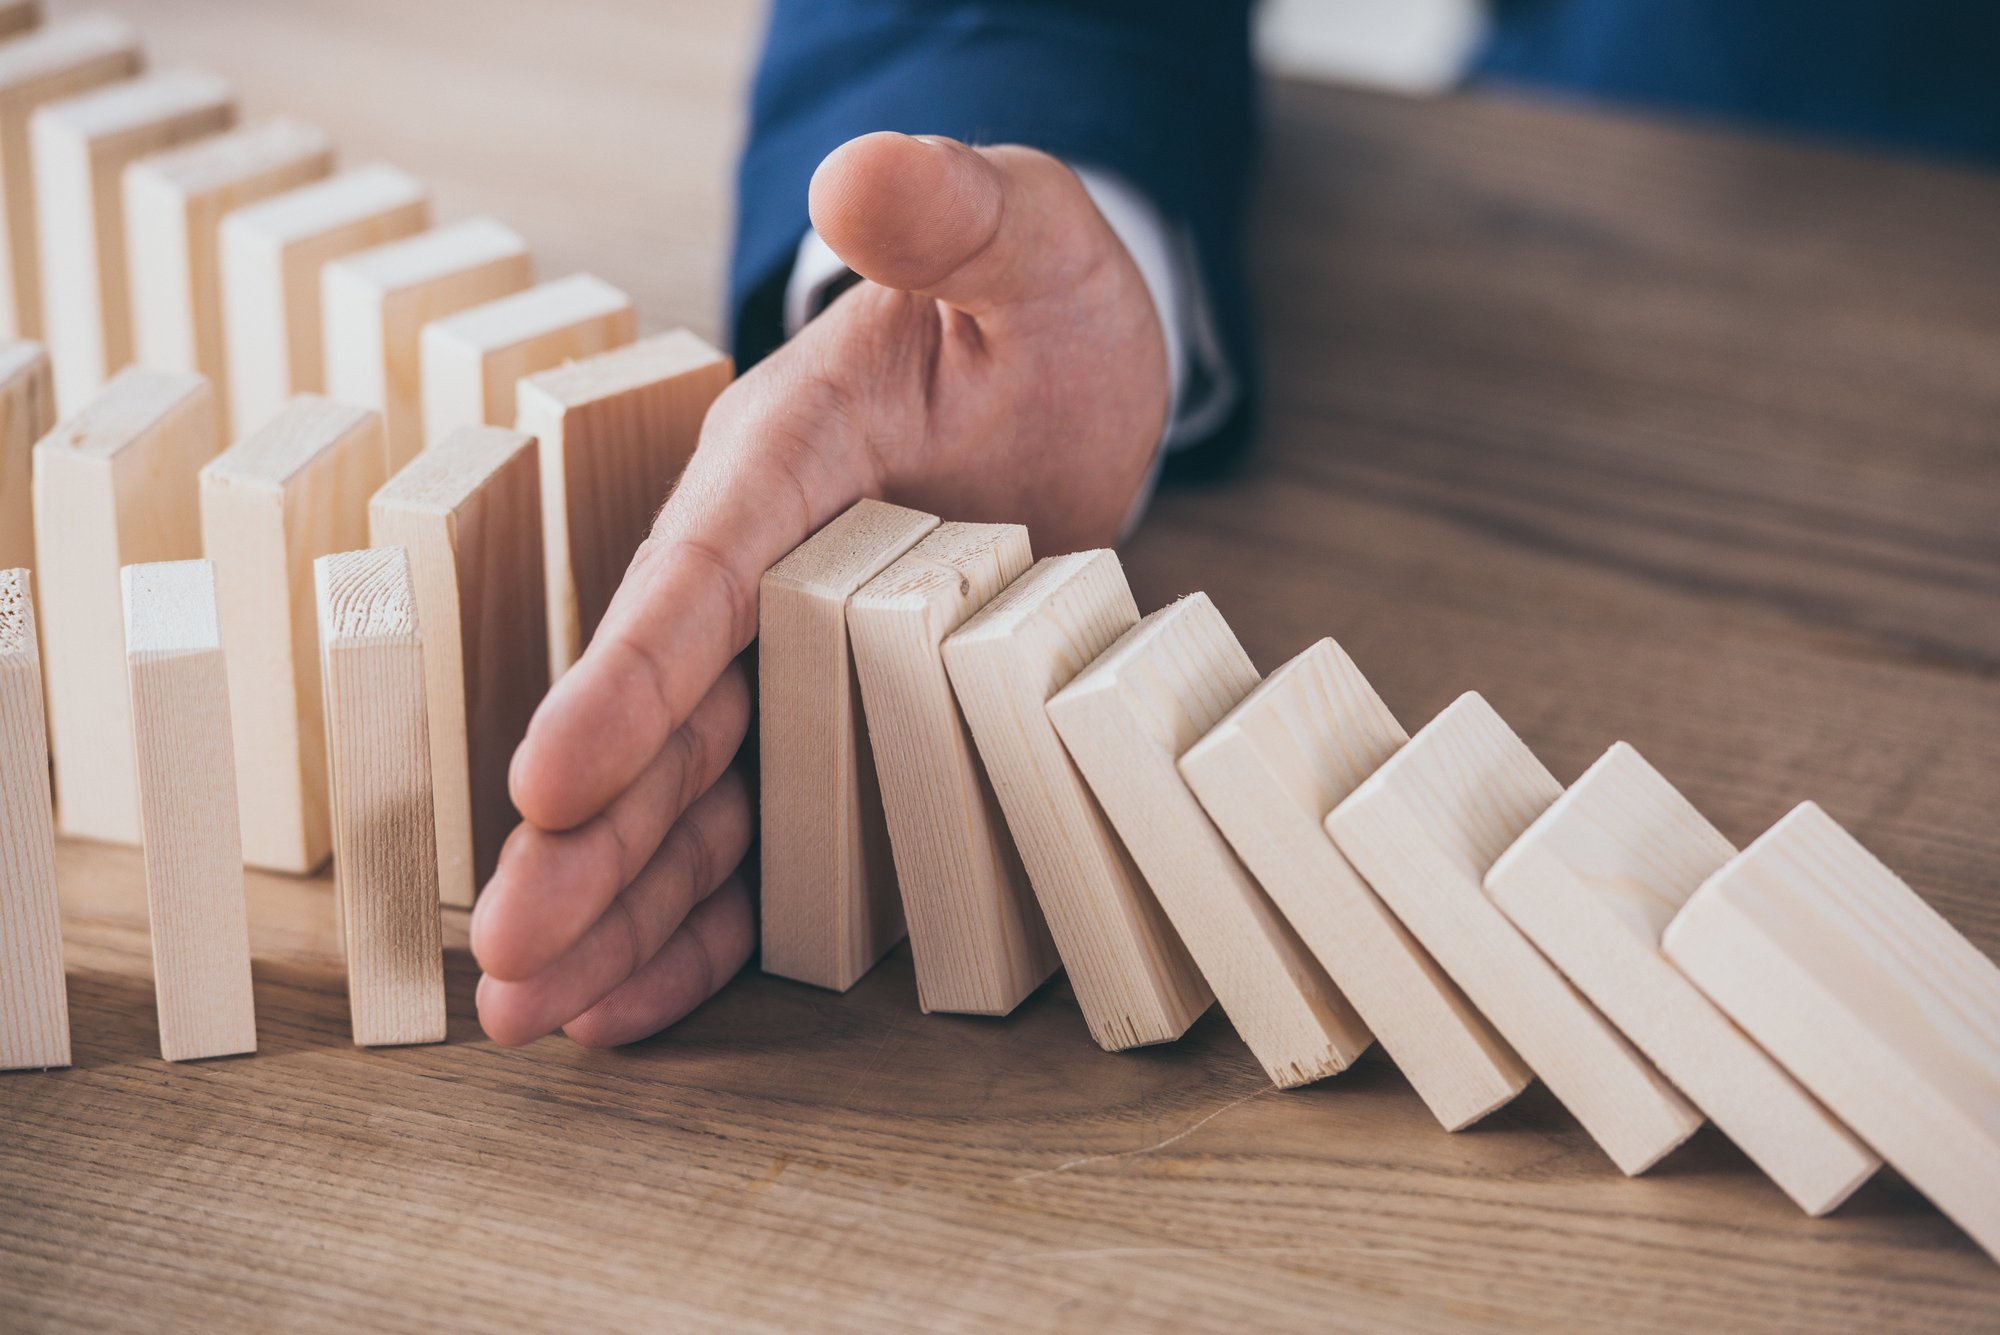 Partial view of risk manager blocking domino effect of falling wooden blocks